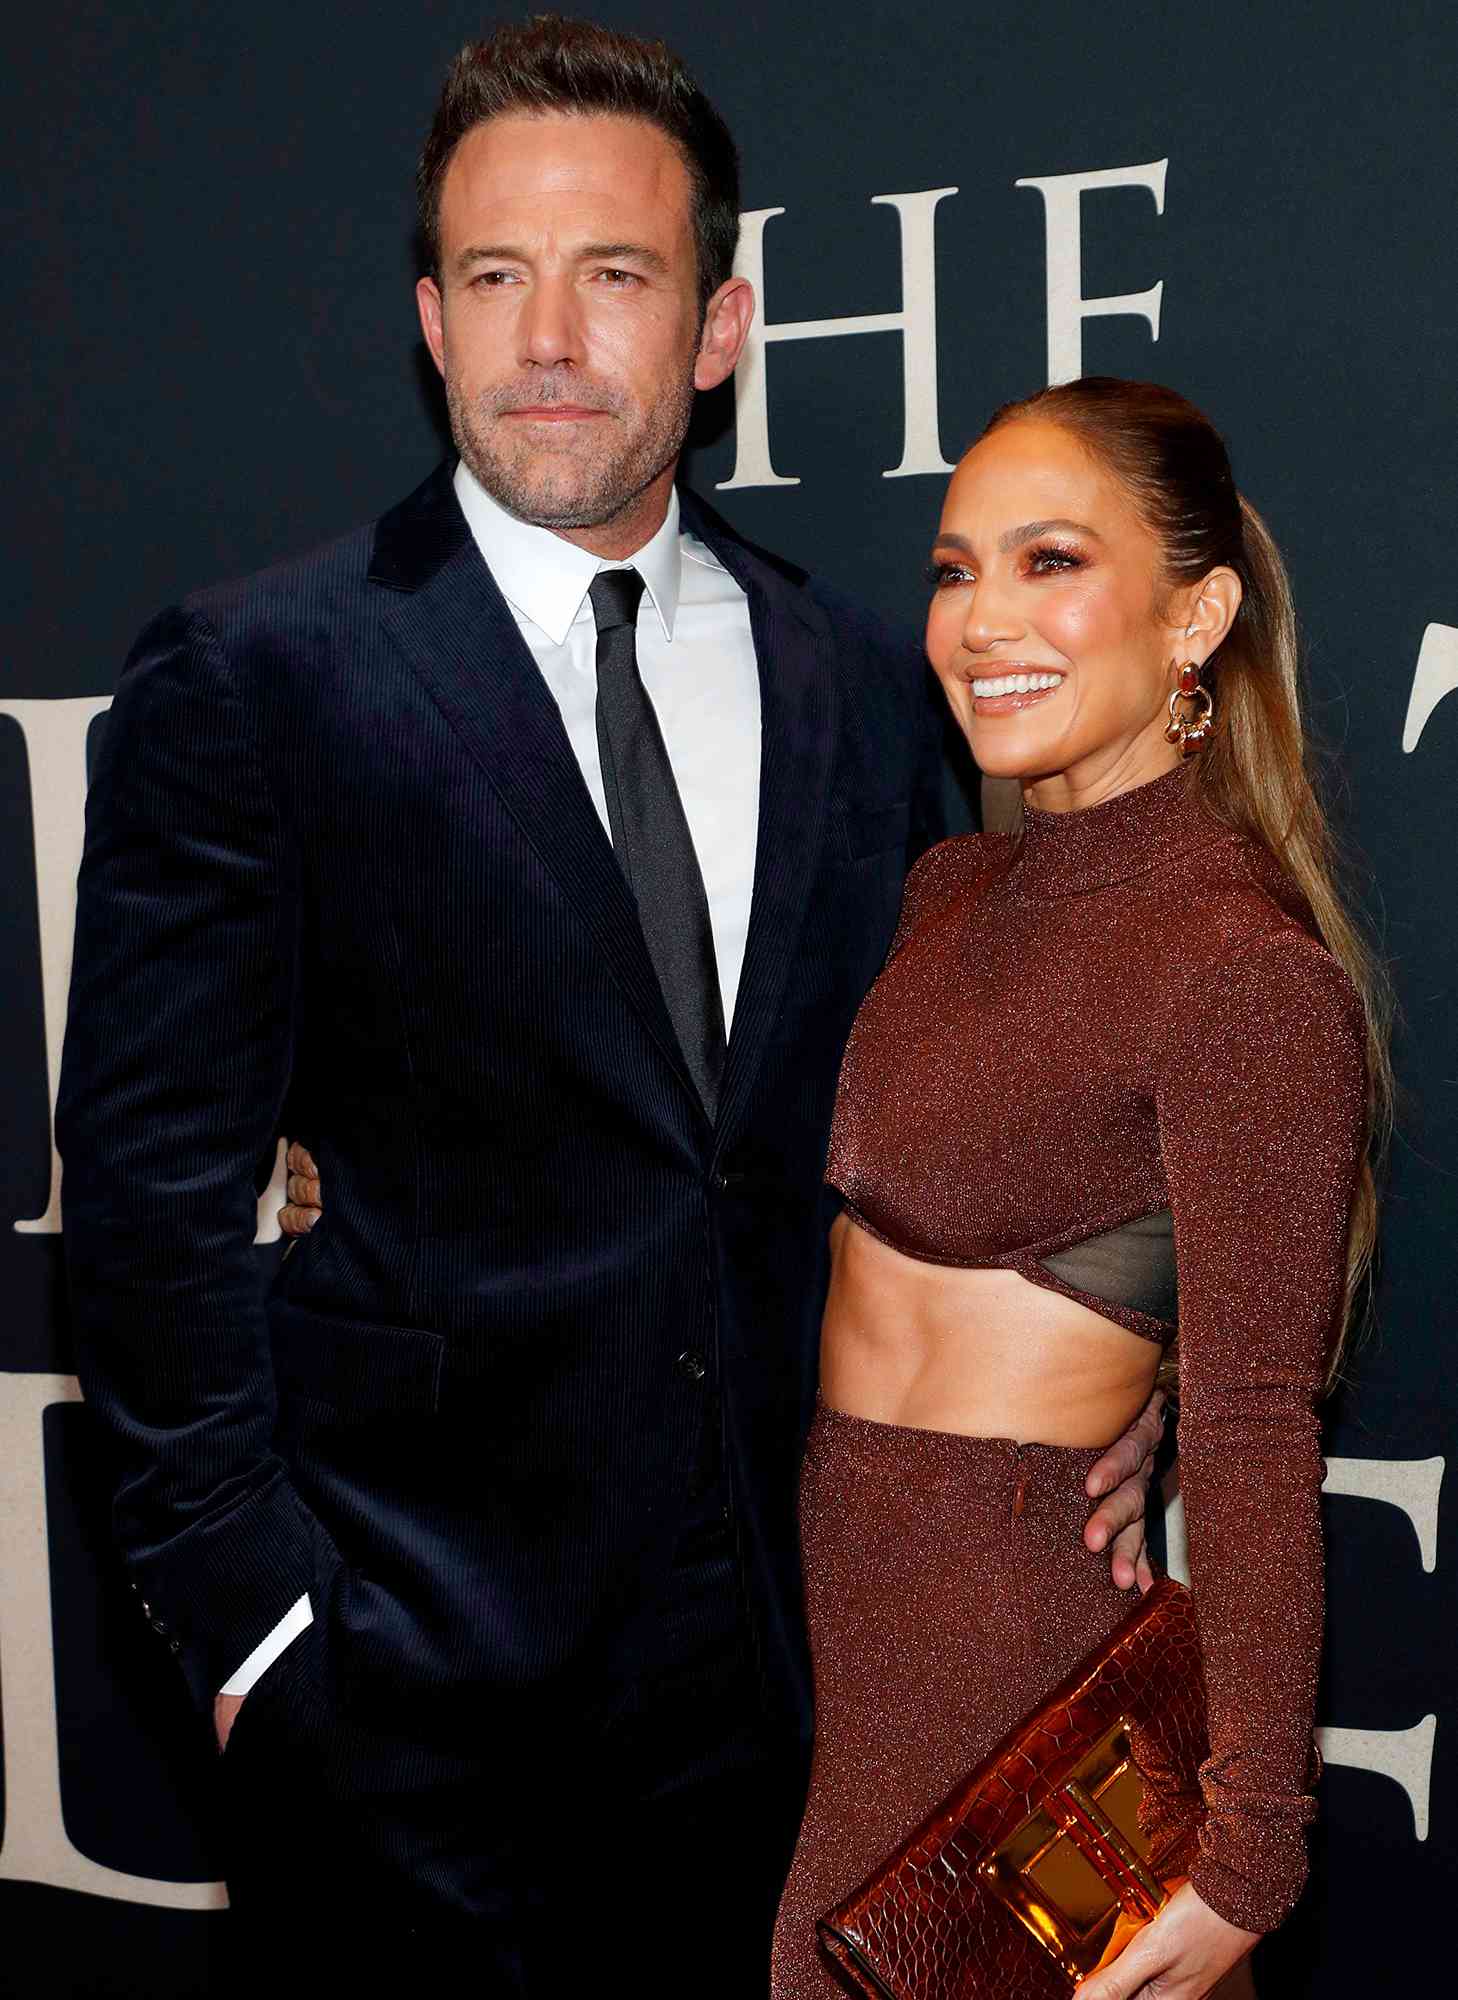 Ben Affleck and Jennifer Lopez attend The Last Duel New York Premiere on October 09, 2021 in New York City.